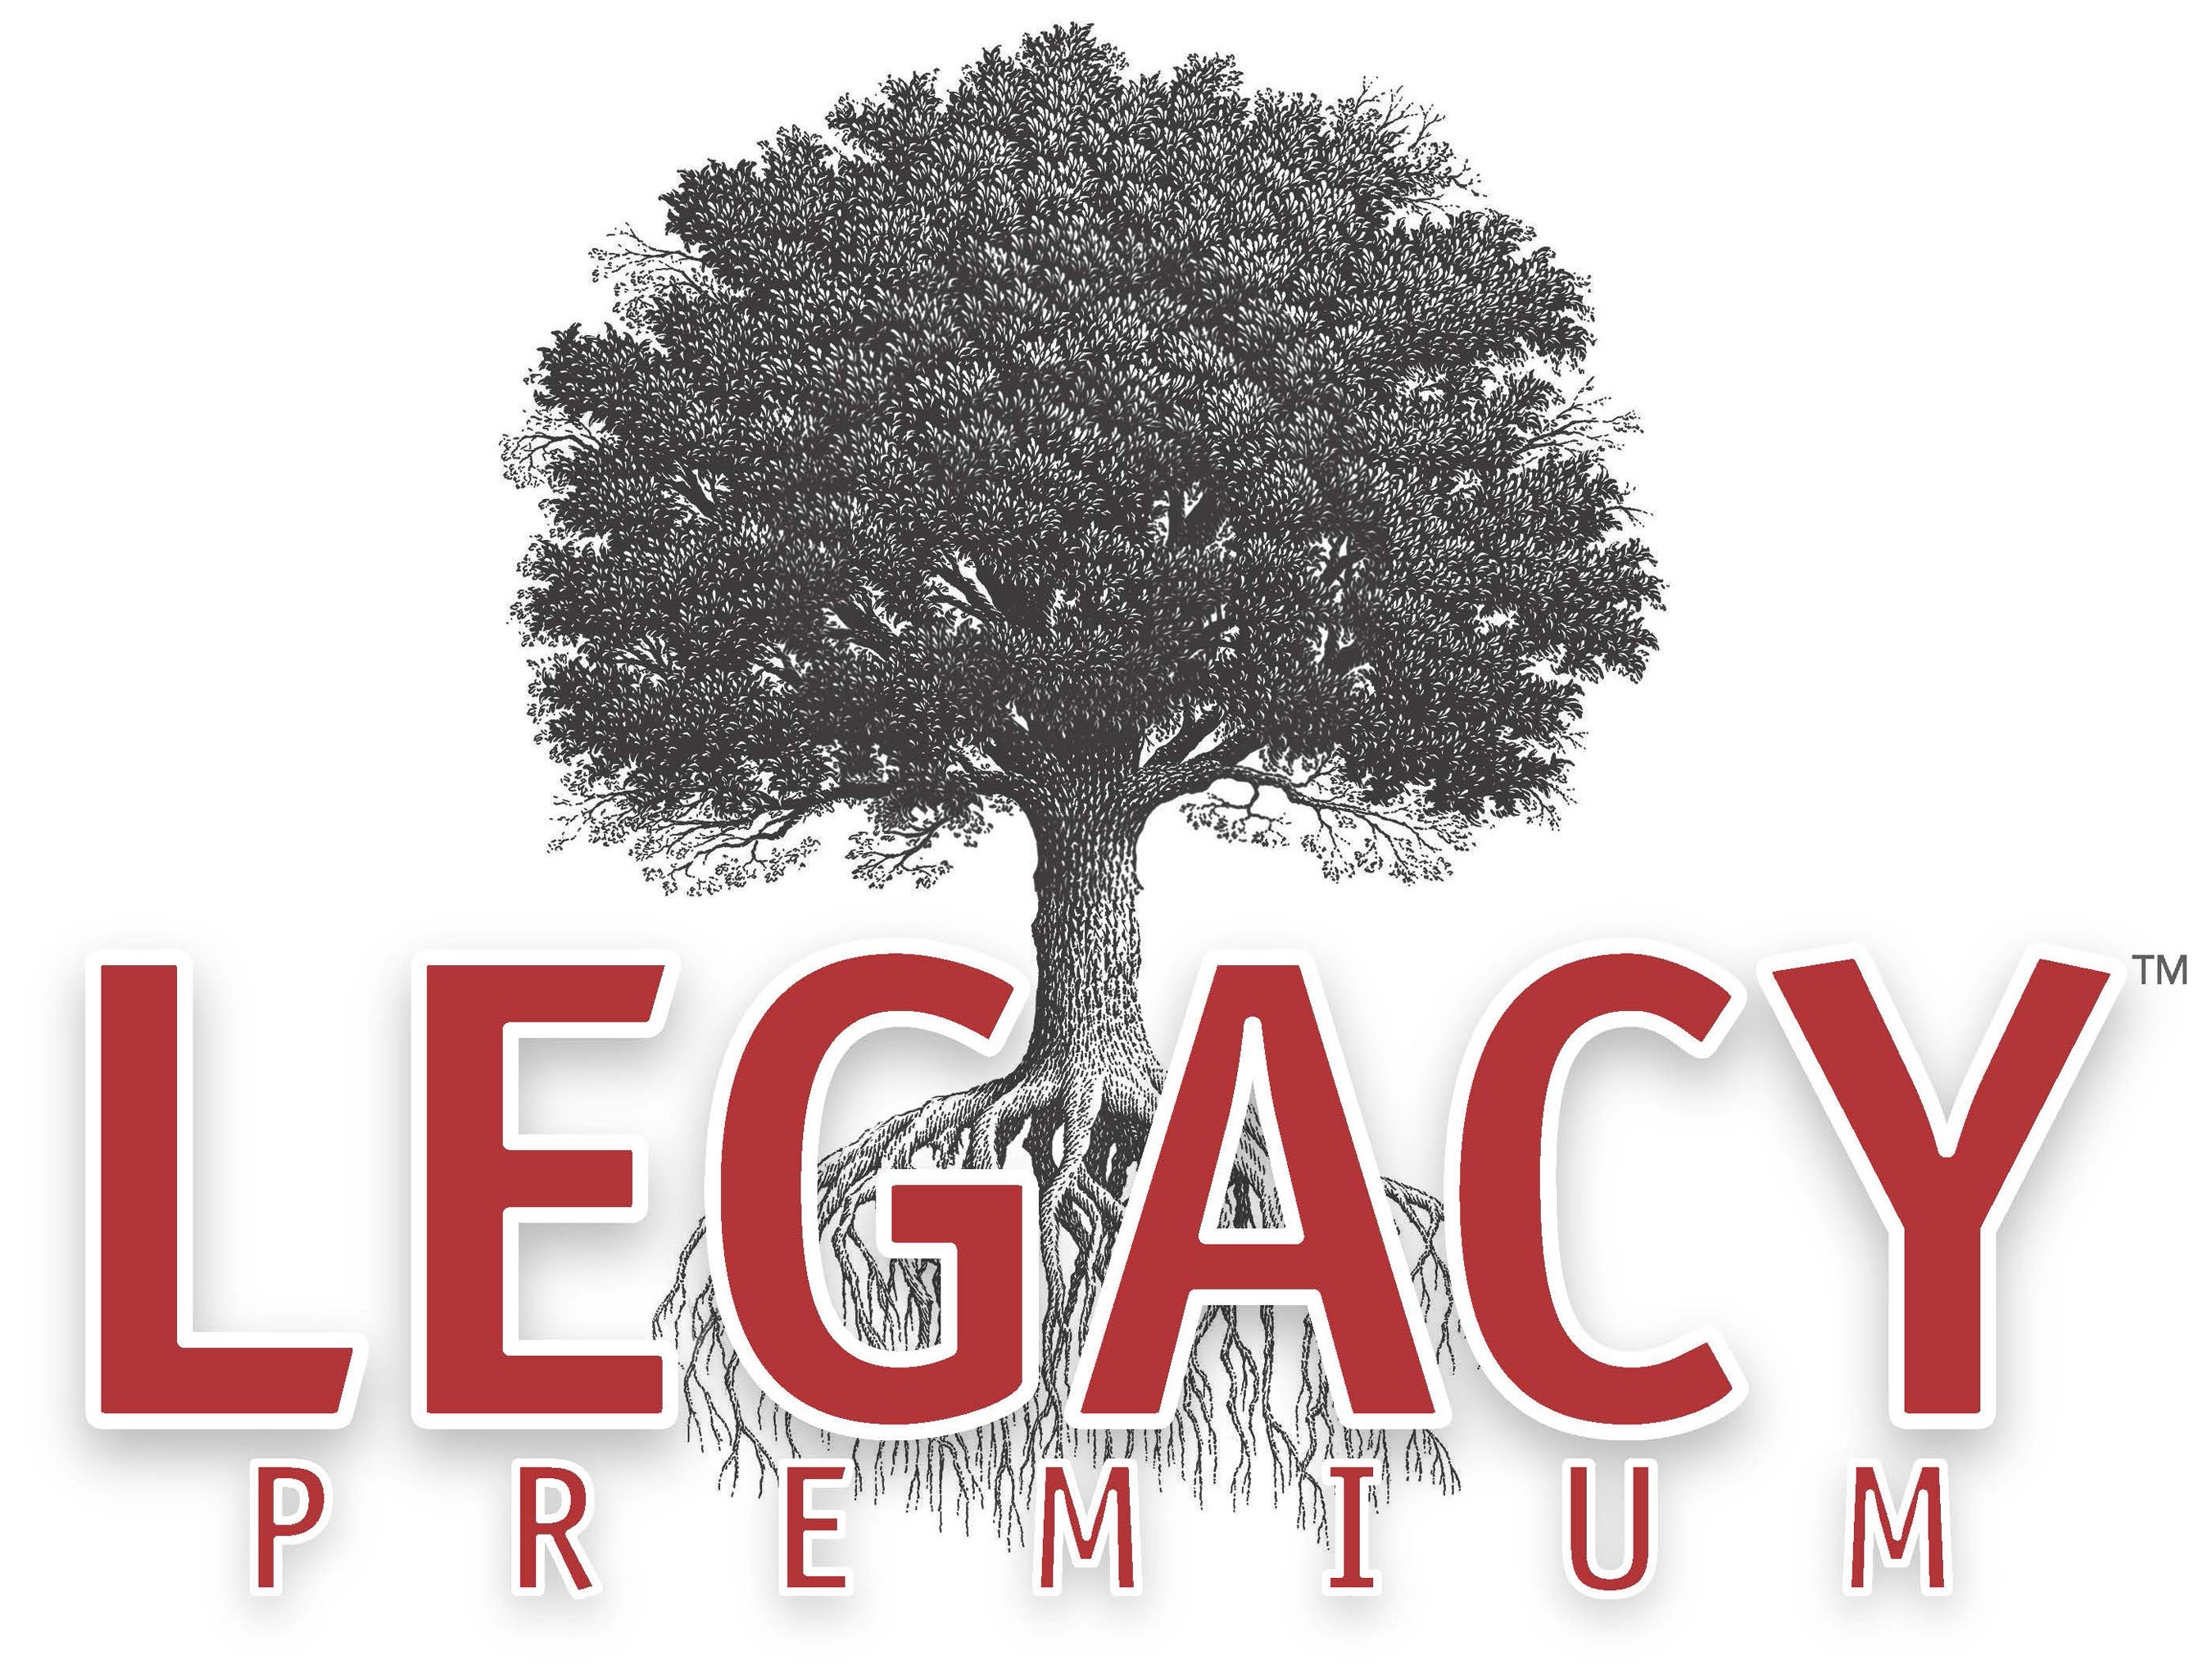 Legacy Food Storage manufacturers Legacy Premium, good tasting, high-quality gourmet meals for food storage and emergency use, and distributes other items to prepare for natural disasters and other emergencies. (PRNewsFoto/Legacy Food Storage) (PRNewsFoto/)